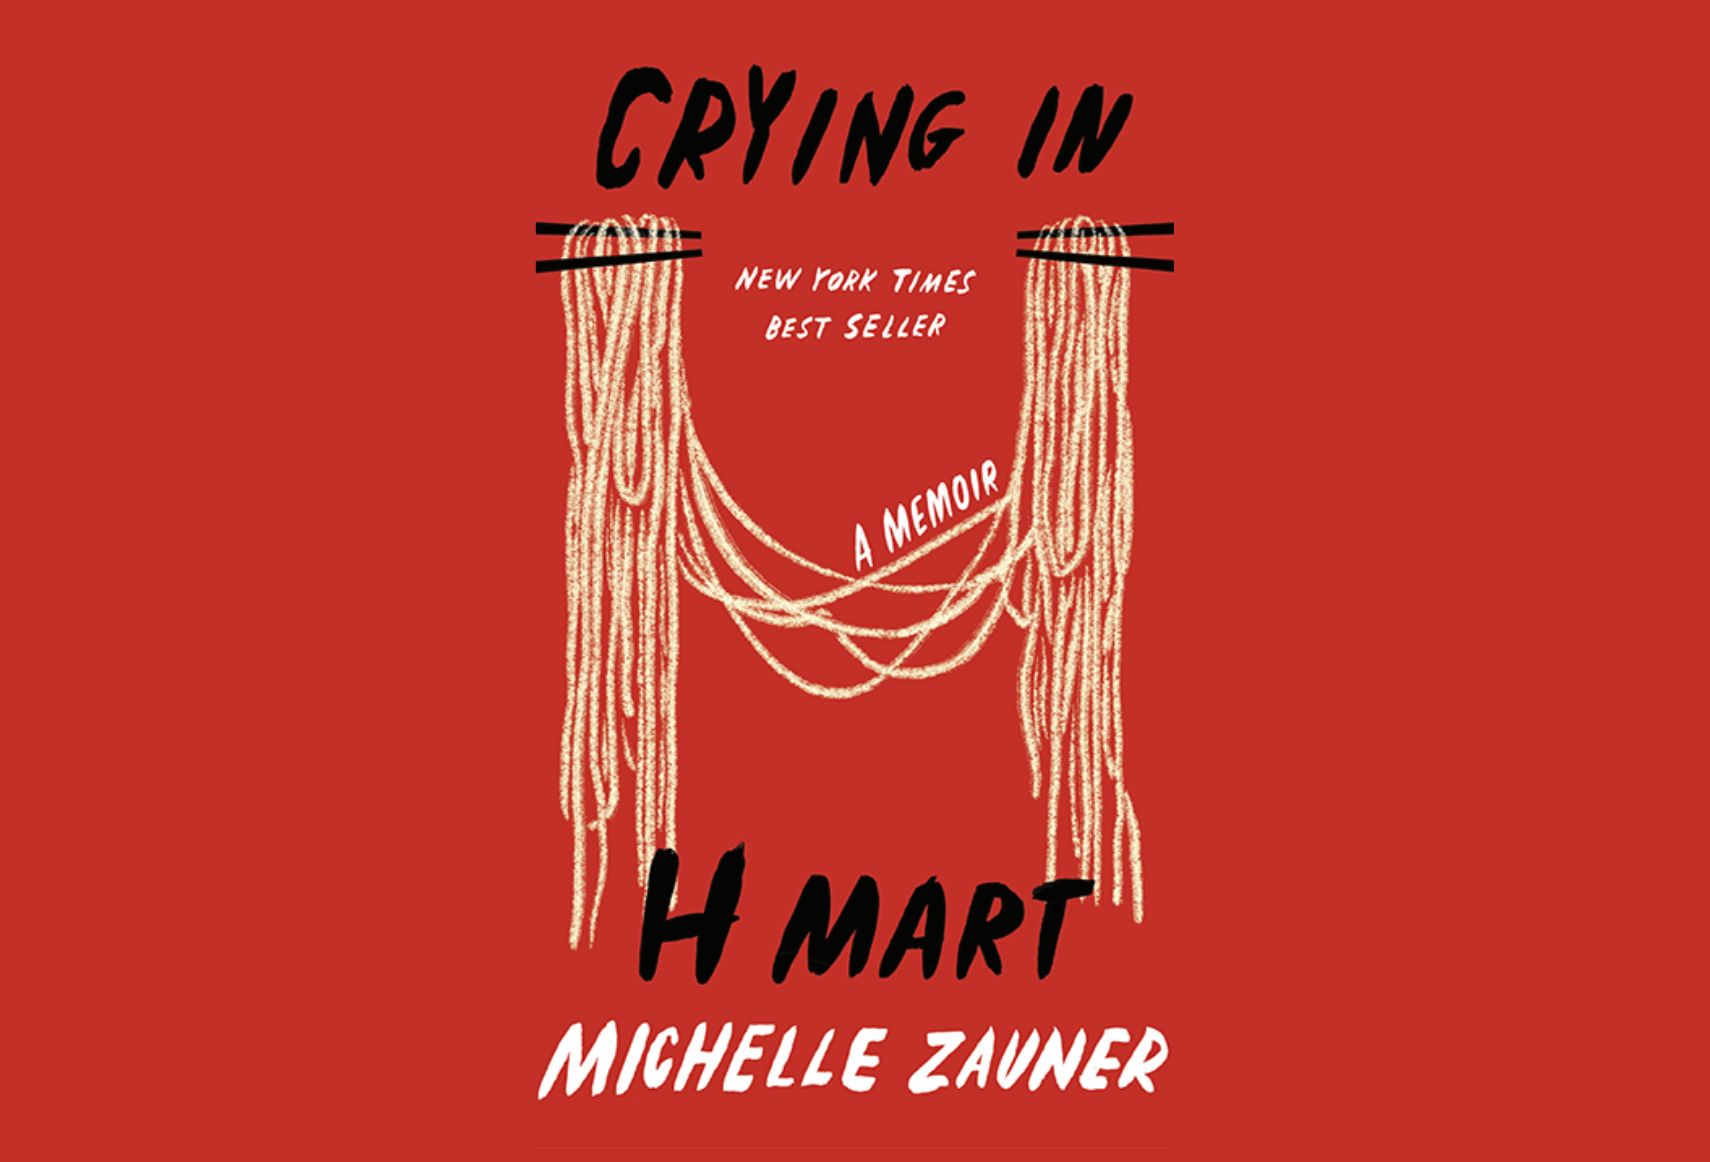 "Cover of 'Crying in H Mart' by Michelle Zauner, featuring noodles hanging from chopsticks on a red background."